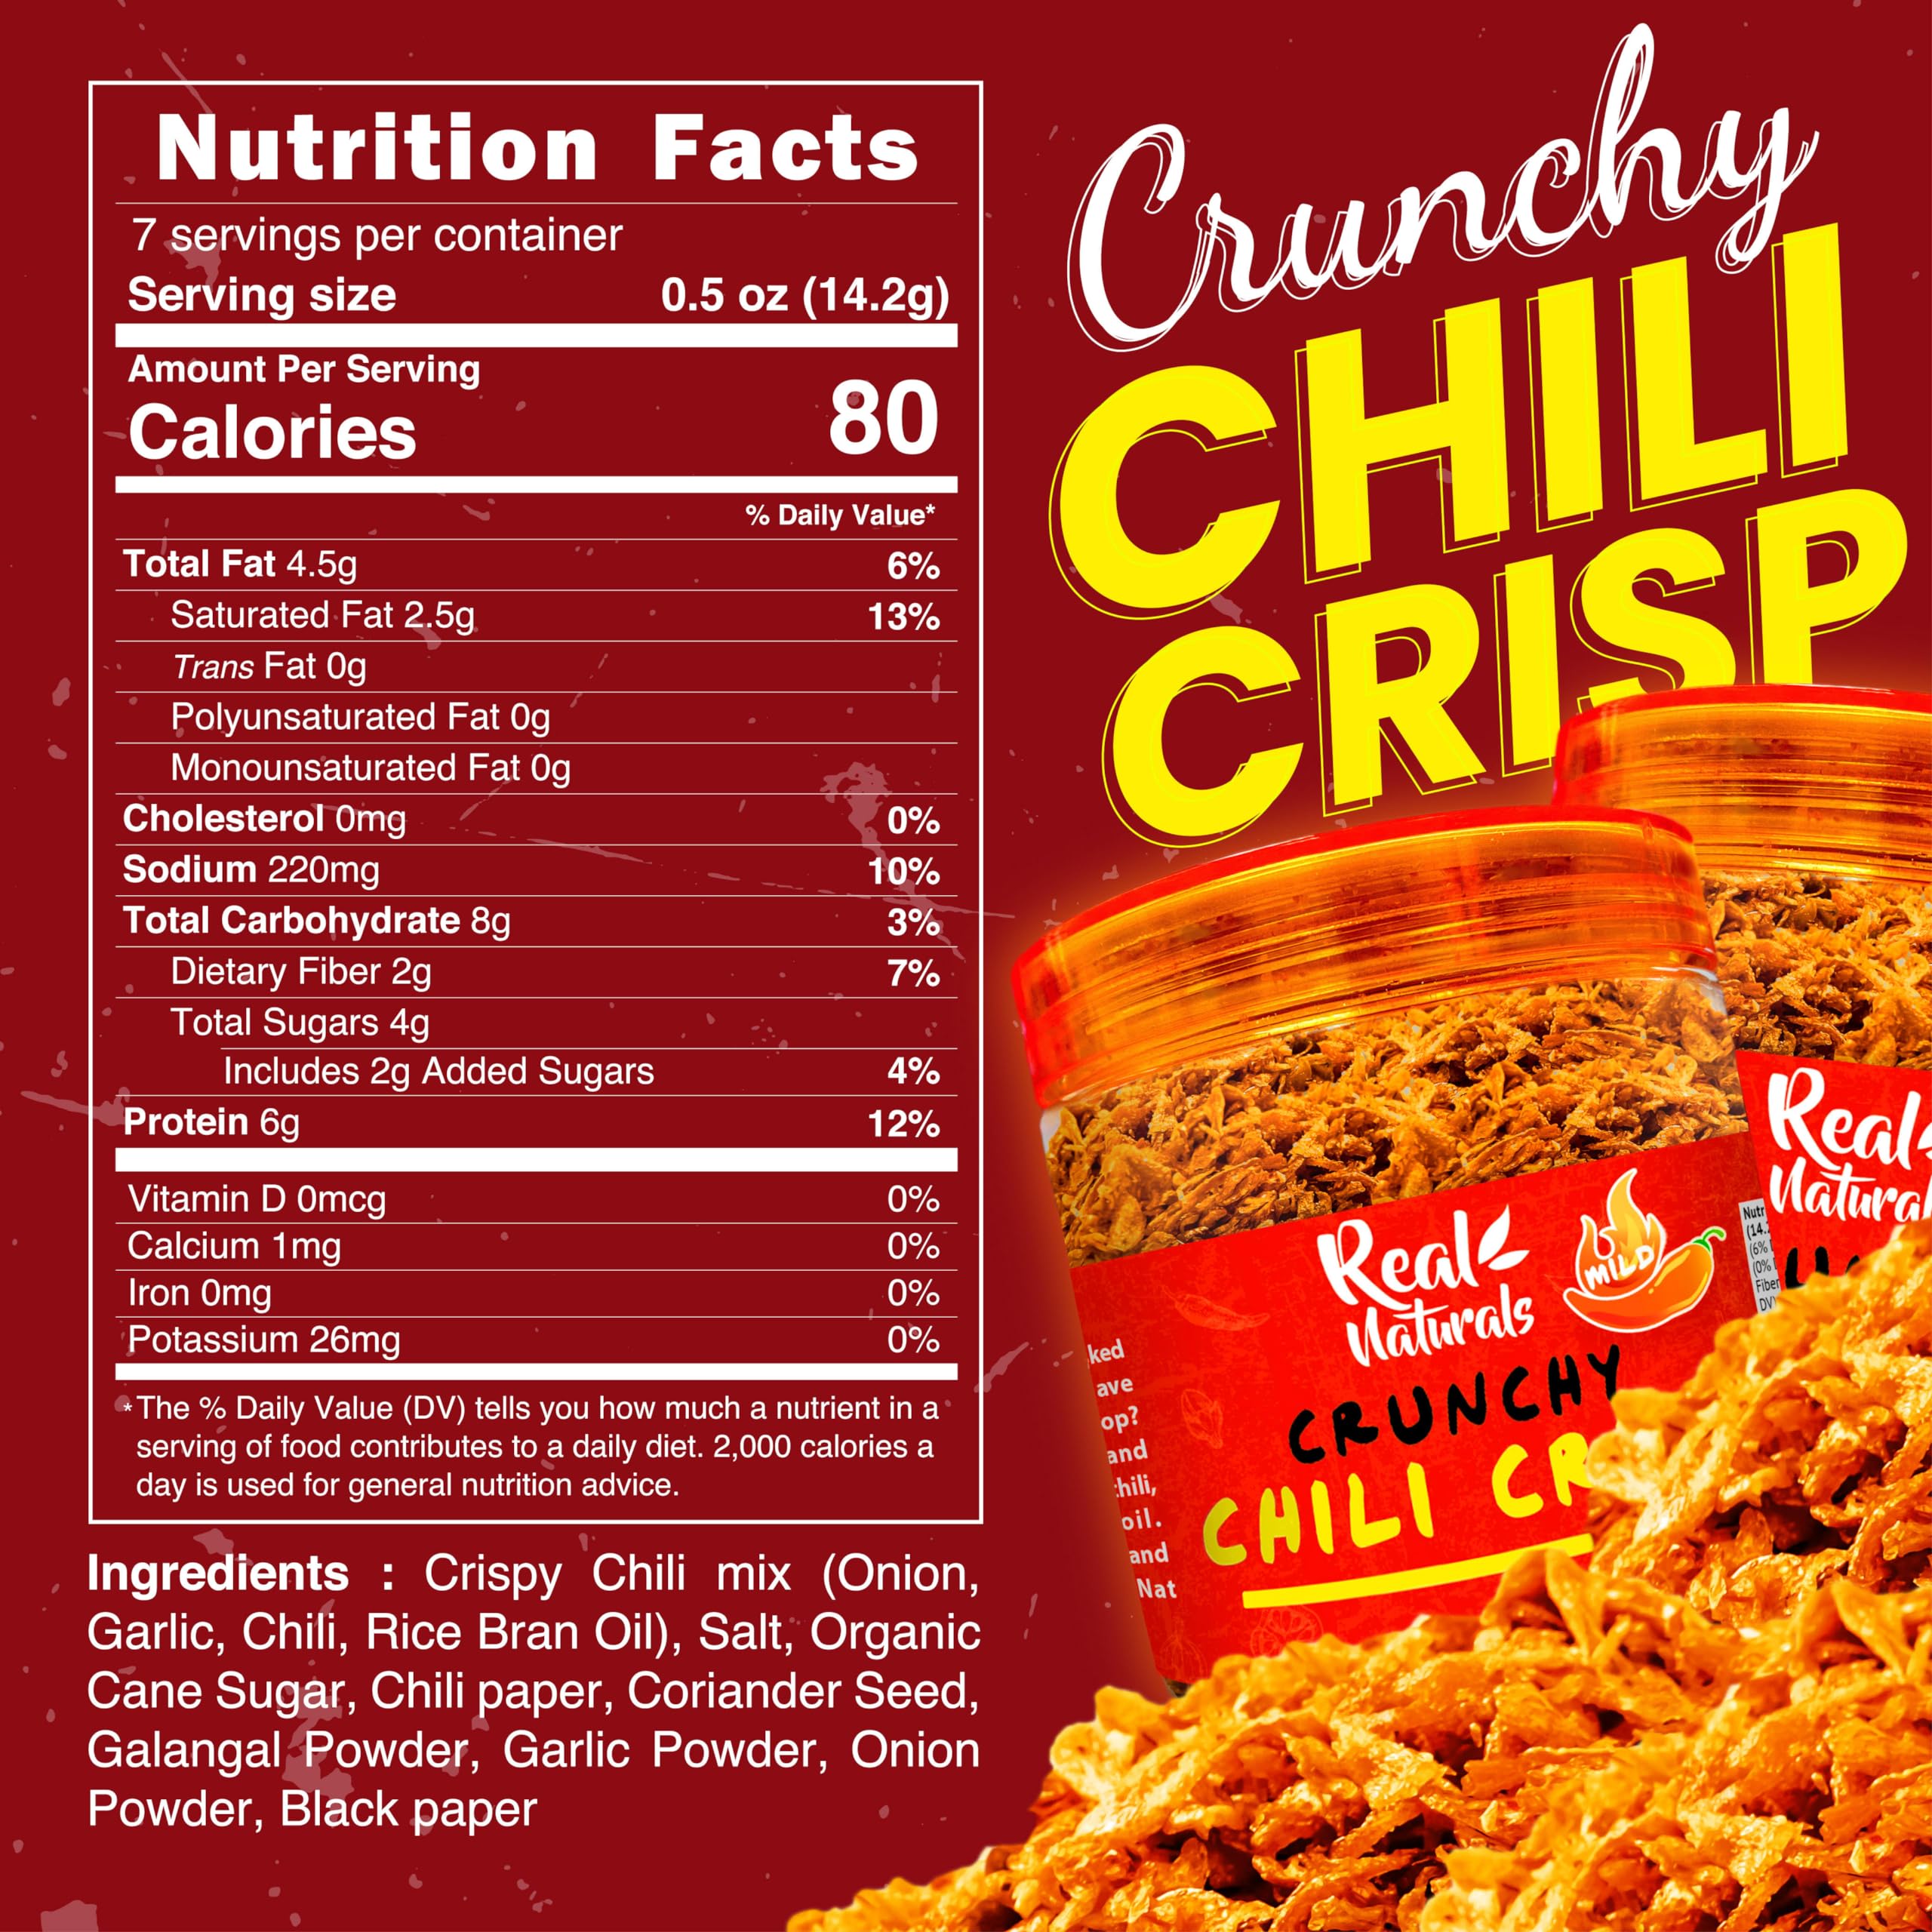 Chili Crisp (medium spicy) chilli crisp oil "without the oil". Crispy chili crunch made with garlic, onion, chilis. For ramen toppings, salads, sushi extra umami. Secret crunchy condiment